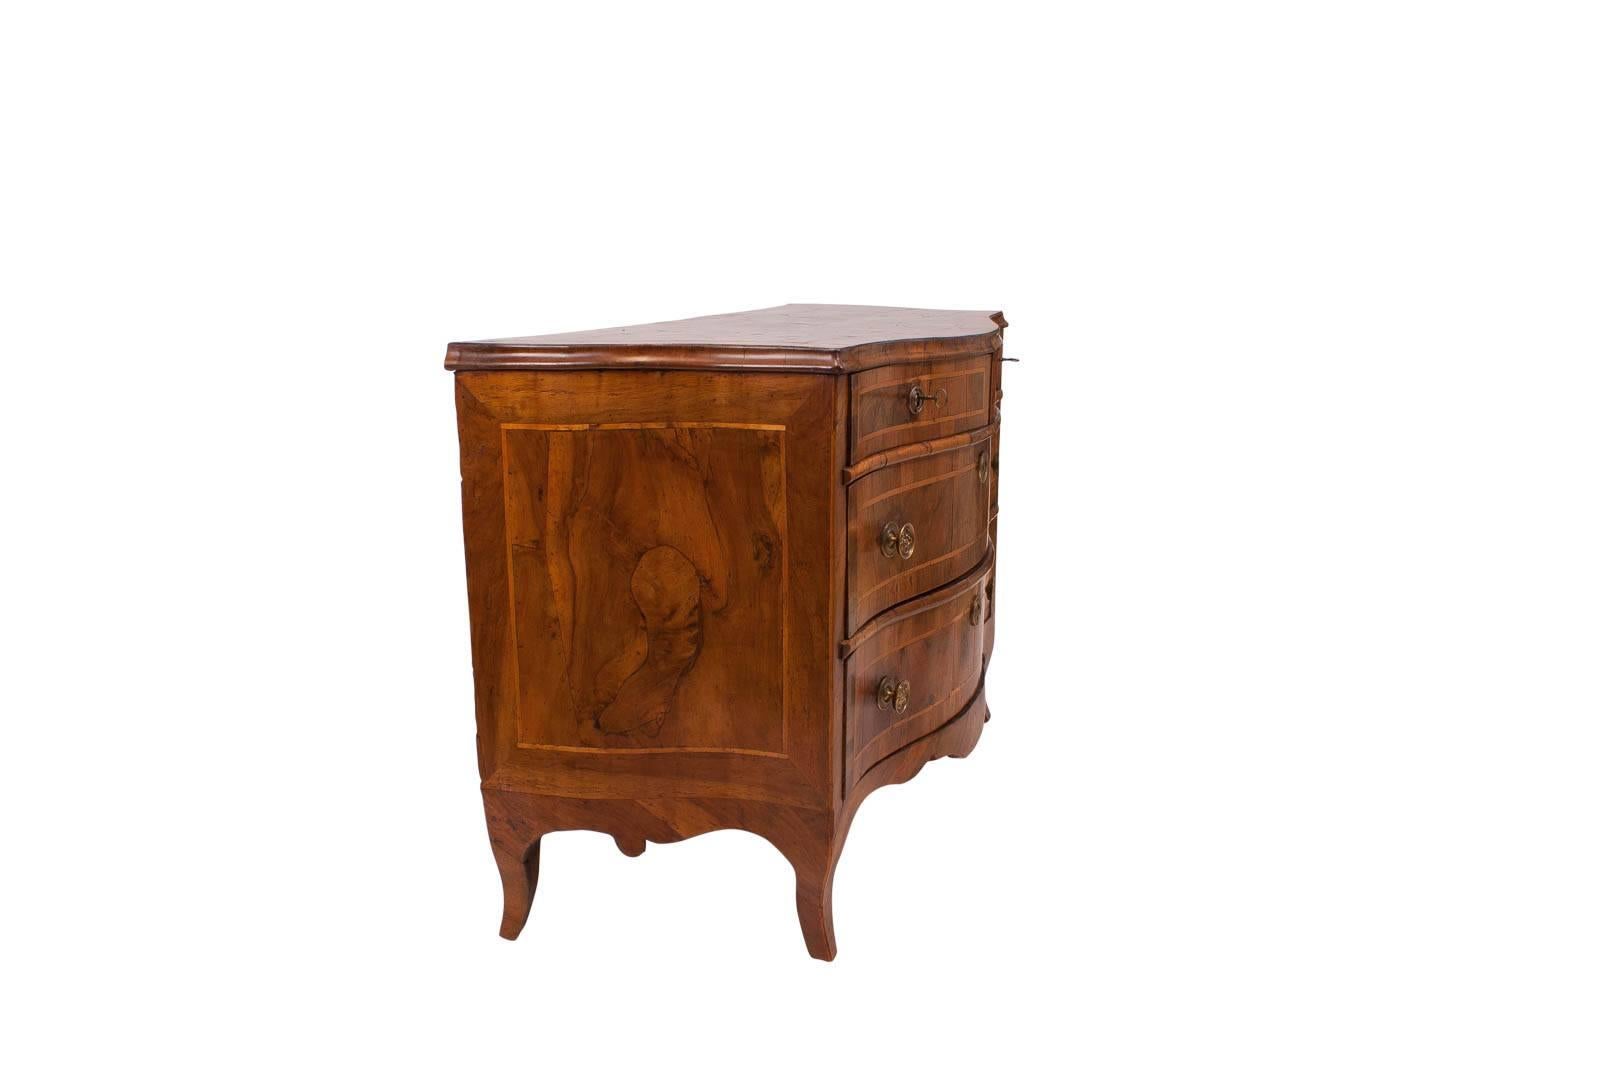 Exceptional olivewood Venetian commode or chest made in Italy, circa 1770. Serpentine shaped front with nicely curved sides. The drawer liners and back appear to be original. Standing on curved and tapered feet with sophisticated shaped apron. Some